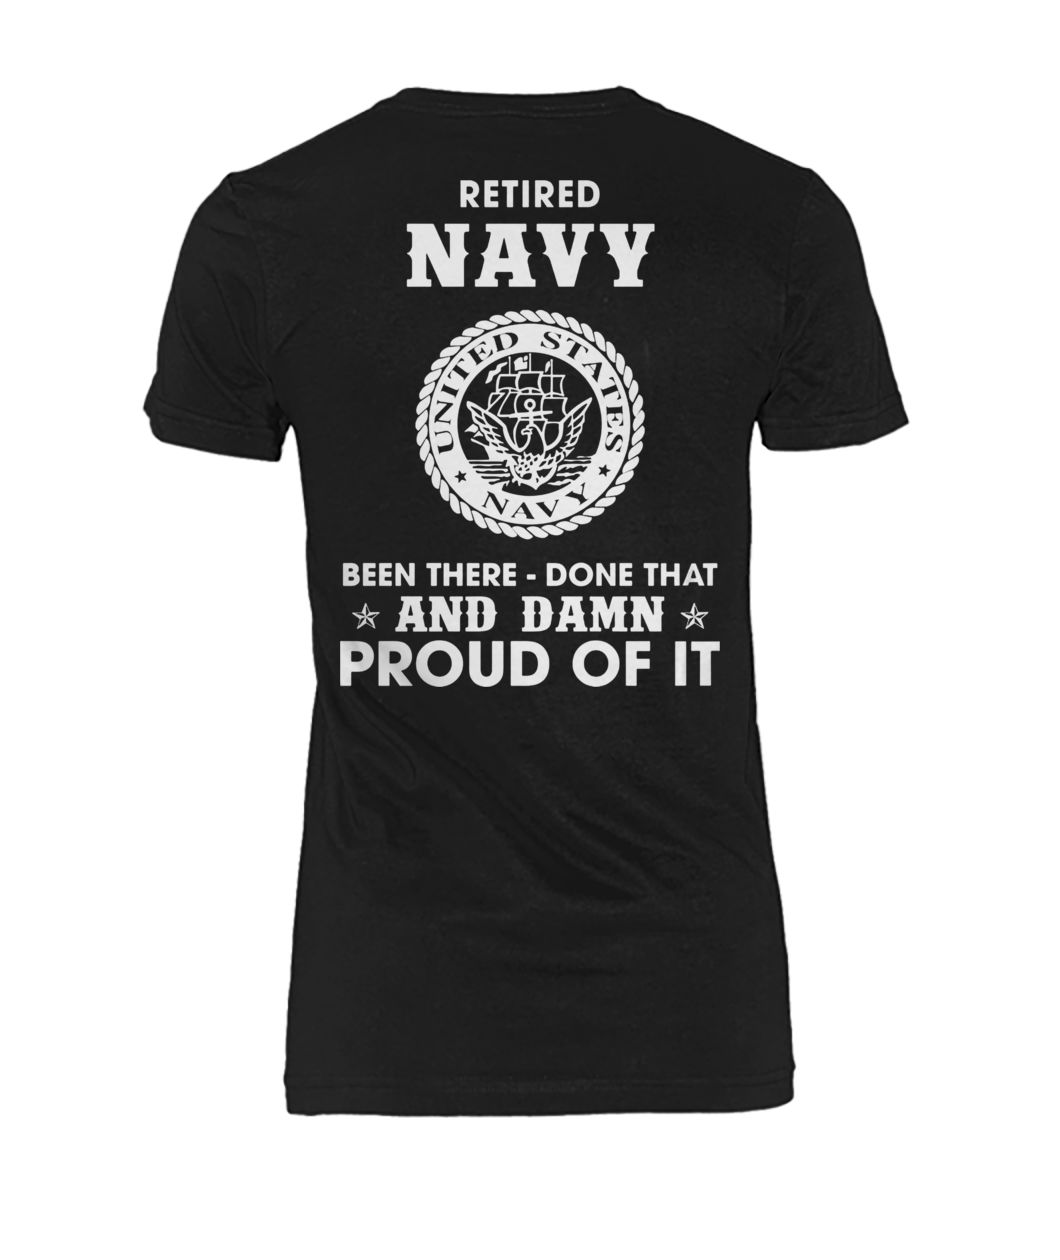 Retired navy been there done that and damn proud of it women's crew tee